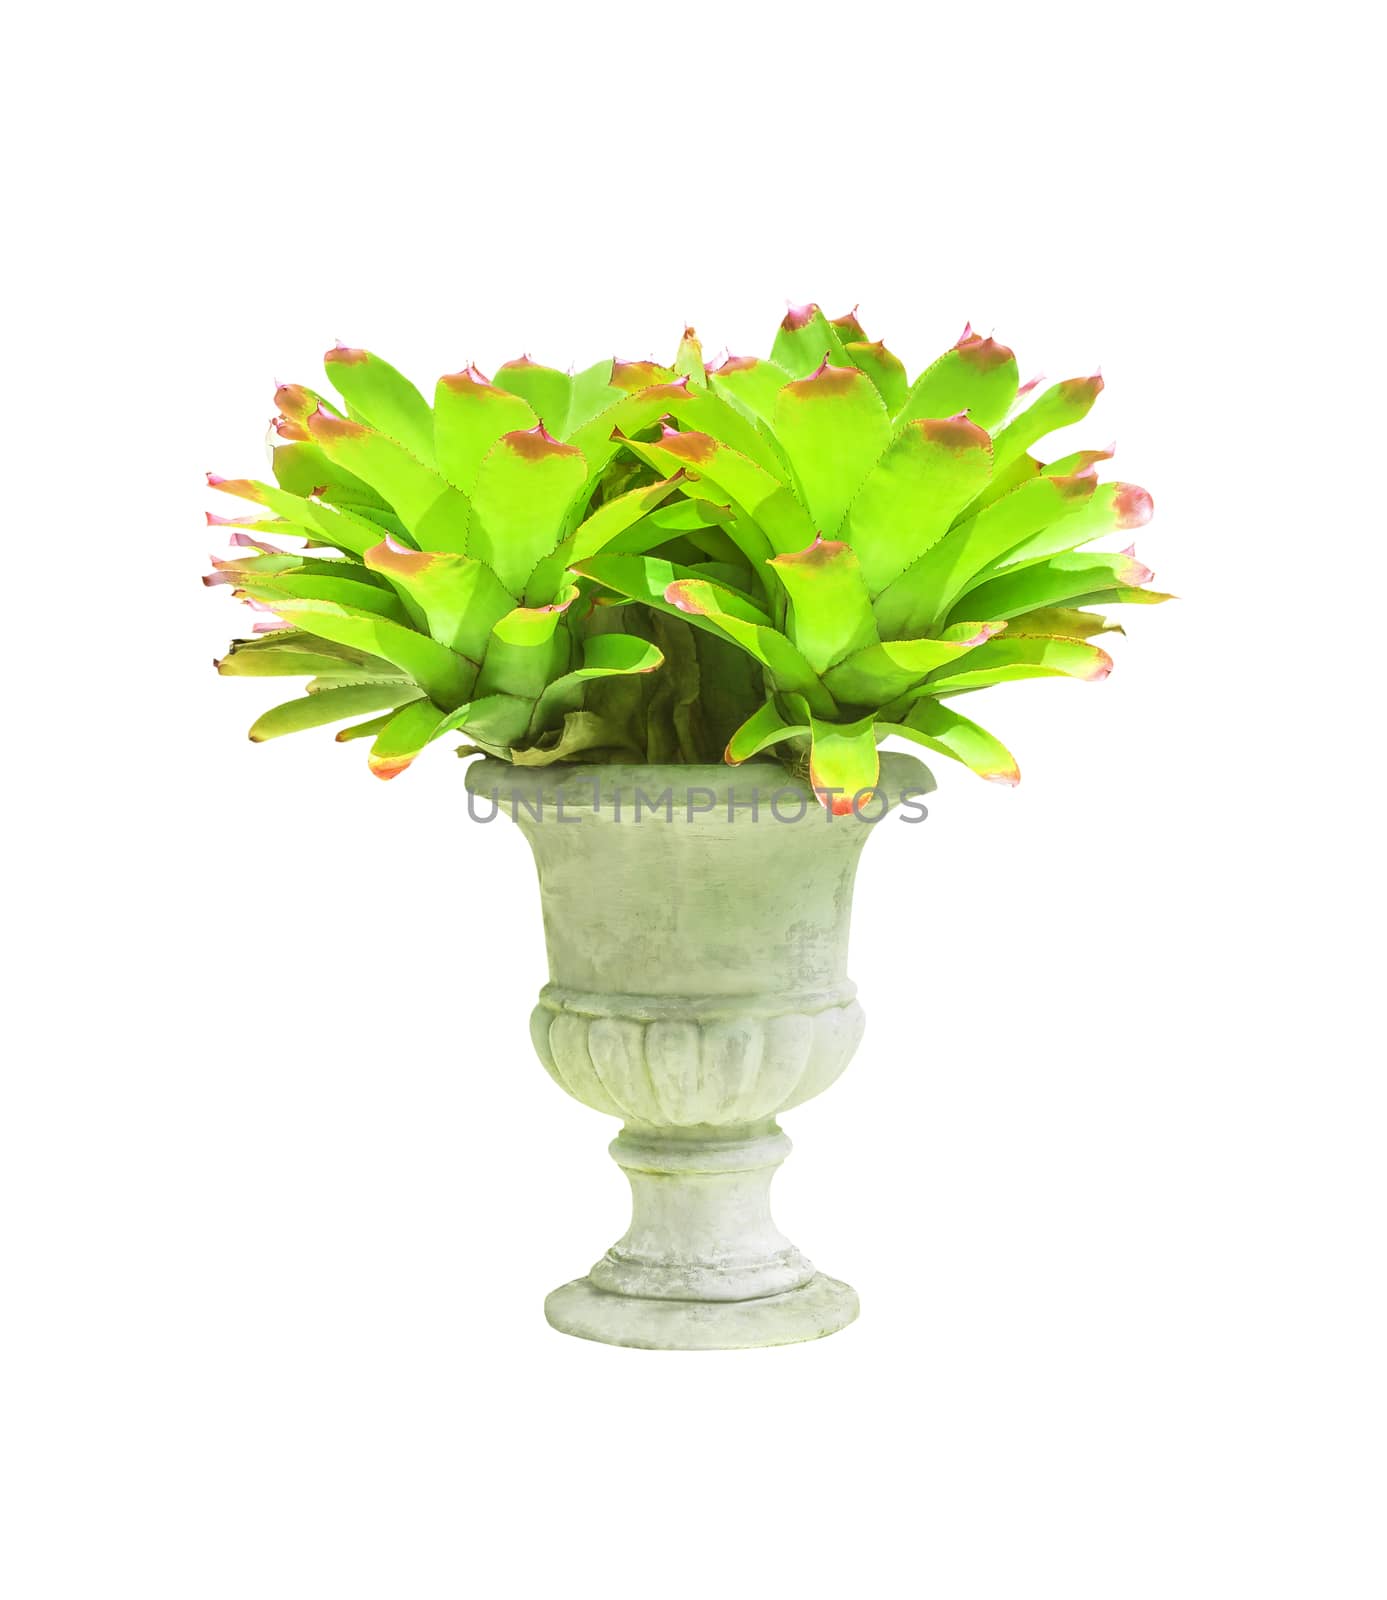 Bromeliad in concrete pot isolated on white with clipping path